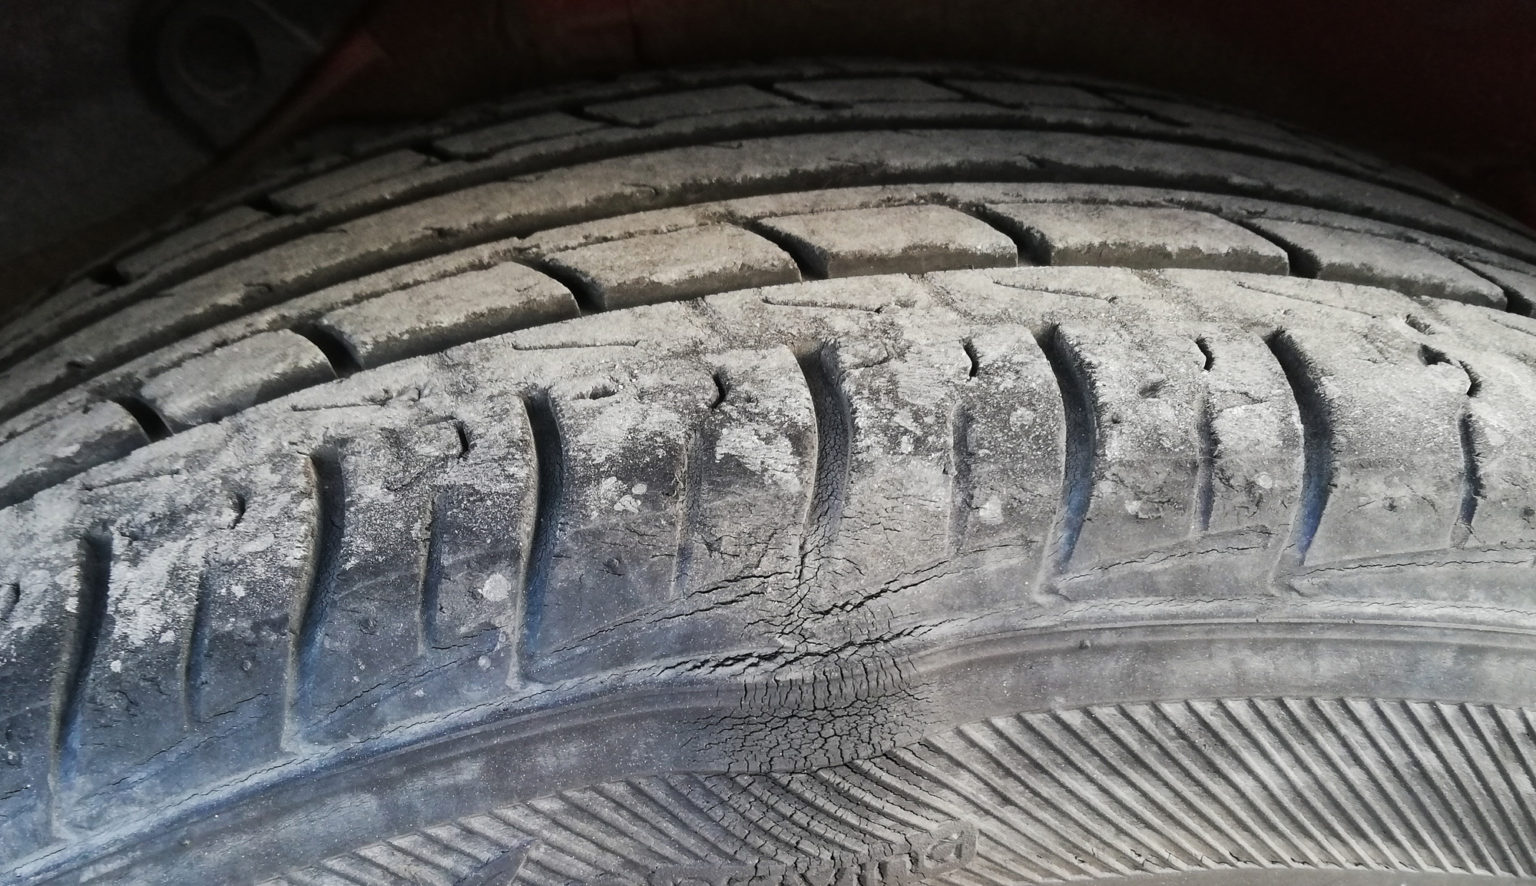 Tire Sidewall Damage When Should You Be Concerned? My Car Makes Noise